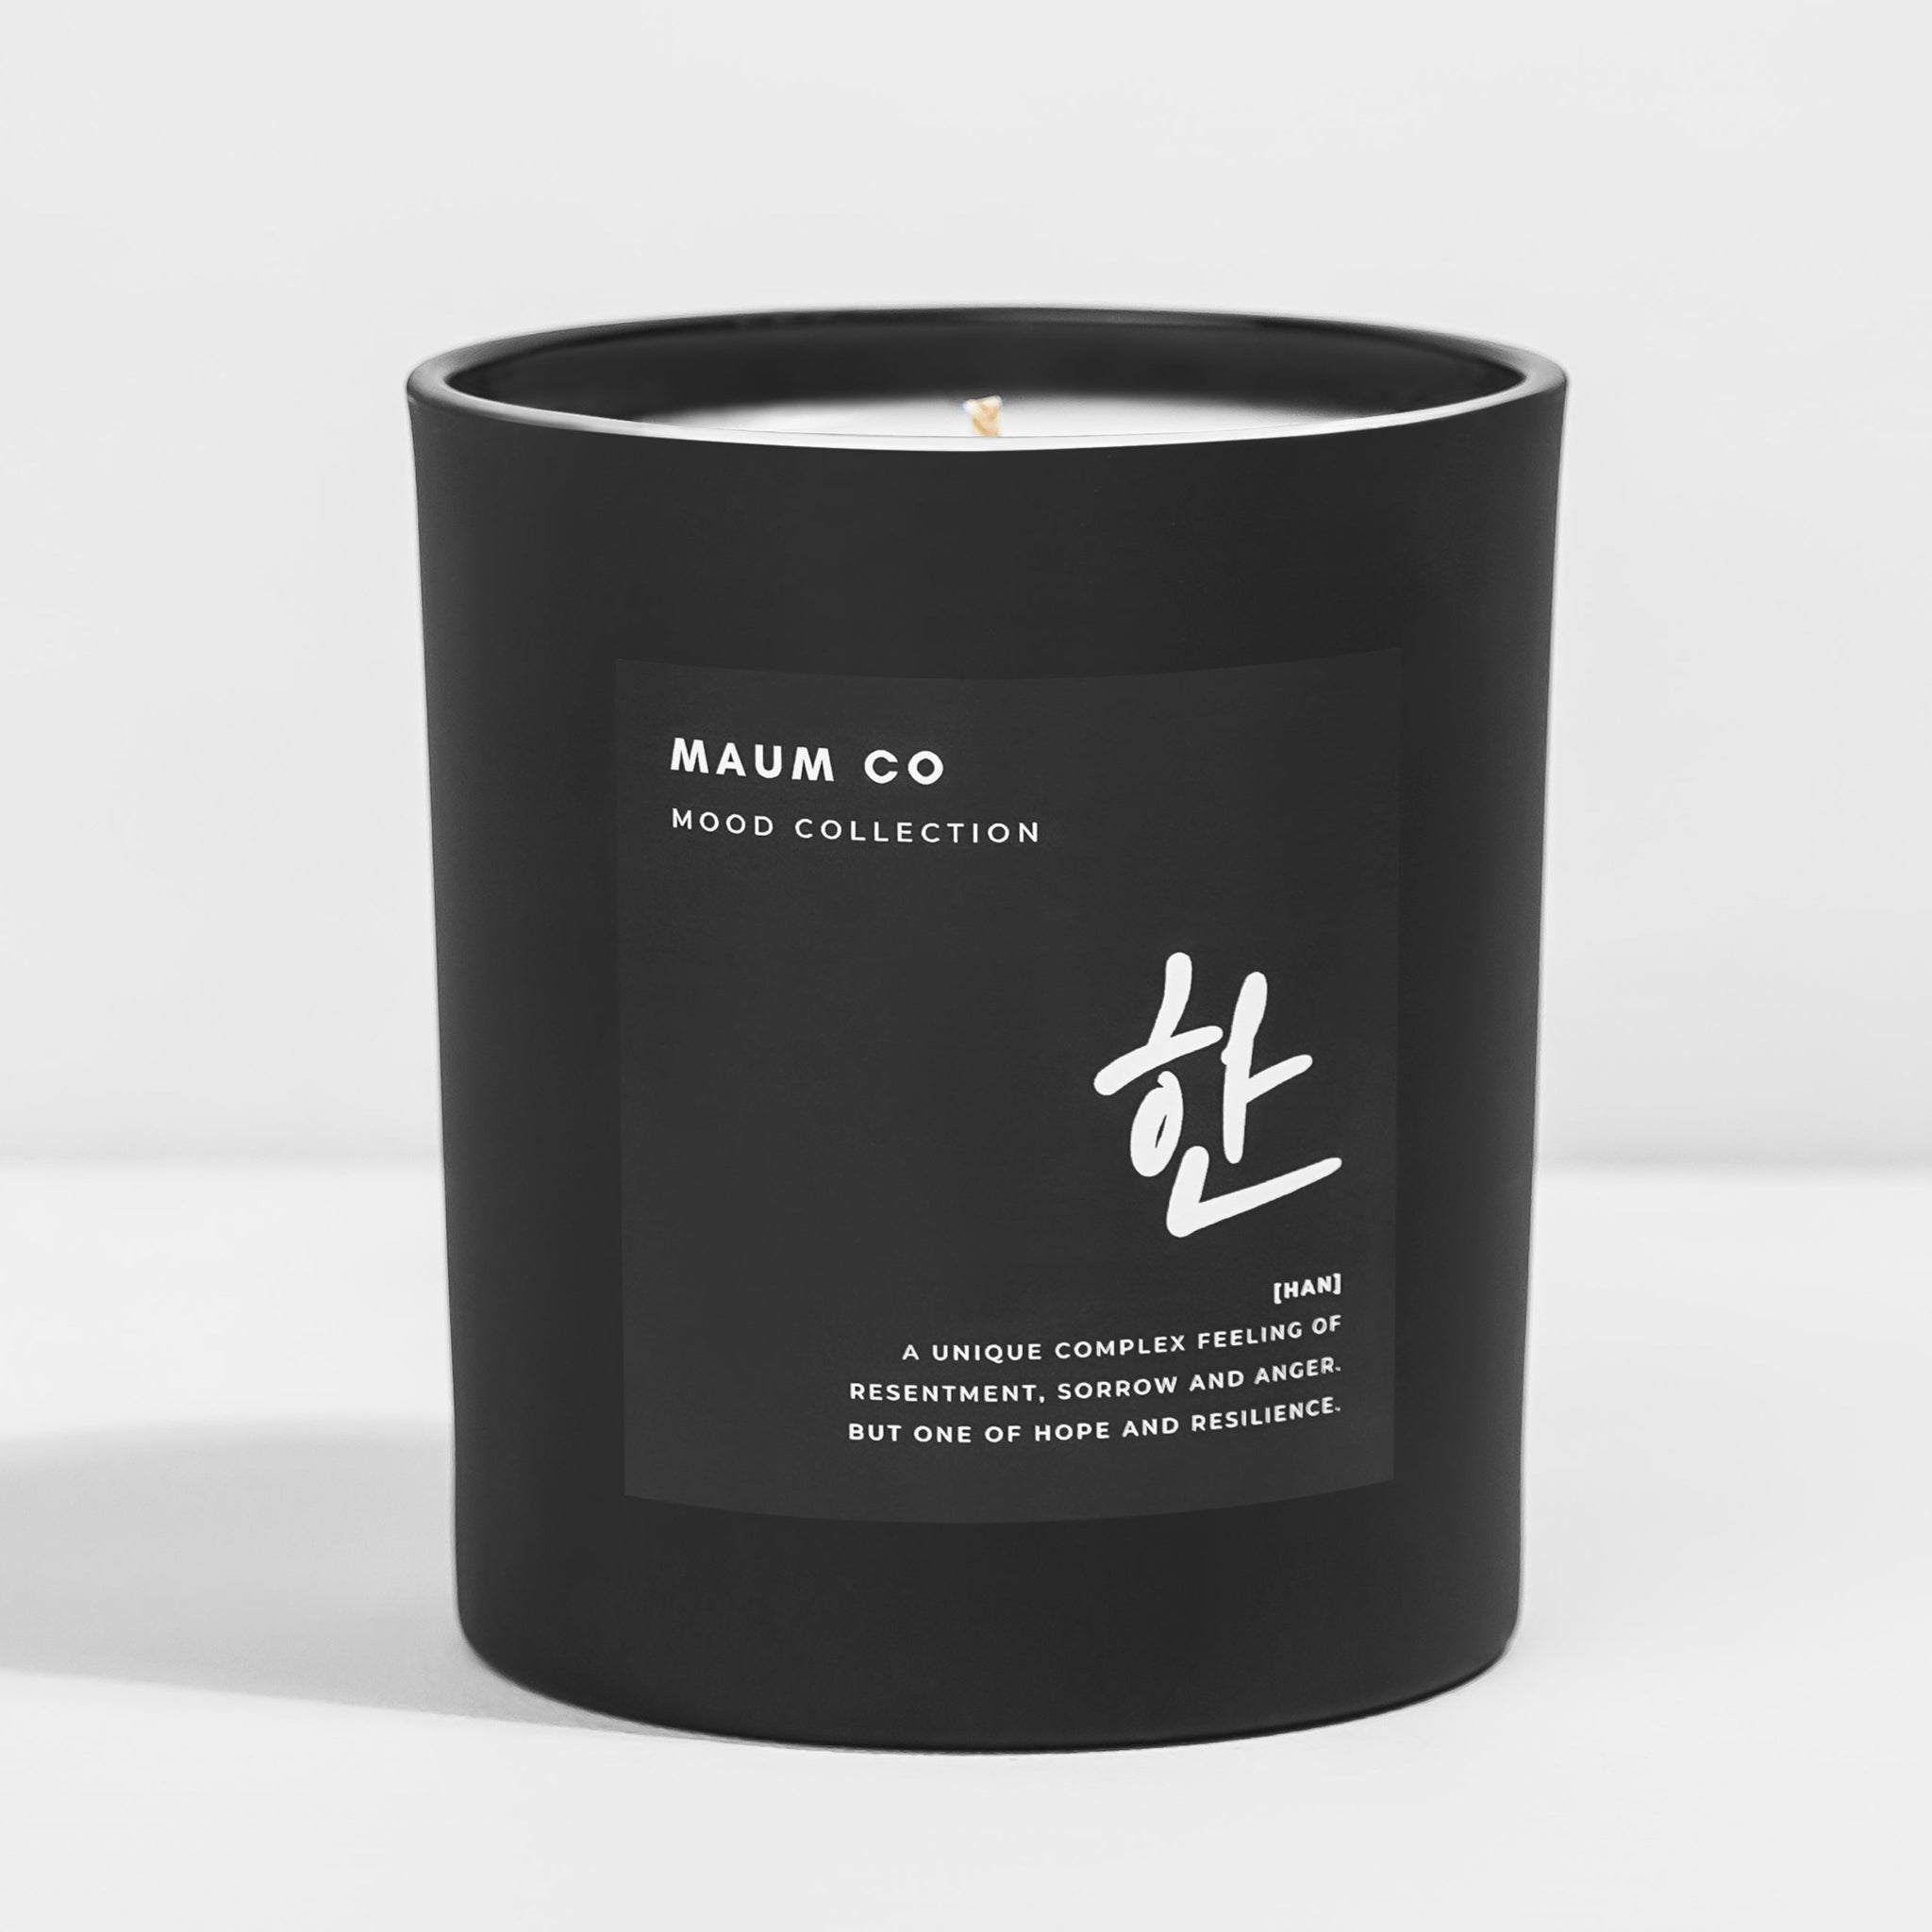 Korean candle meaning heartache